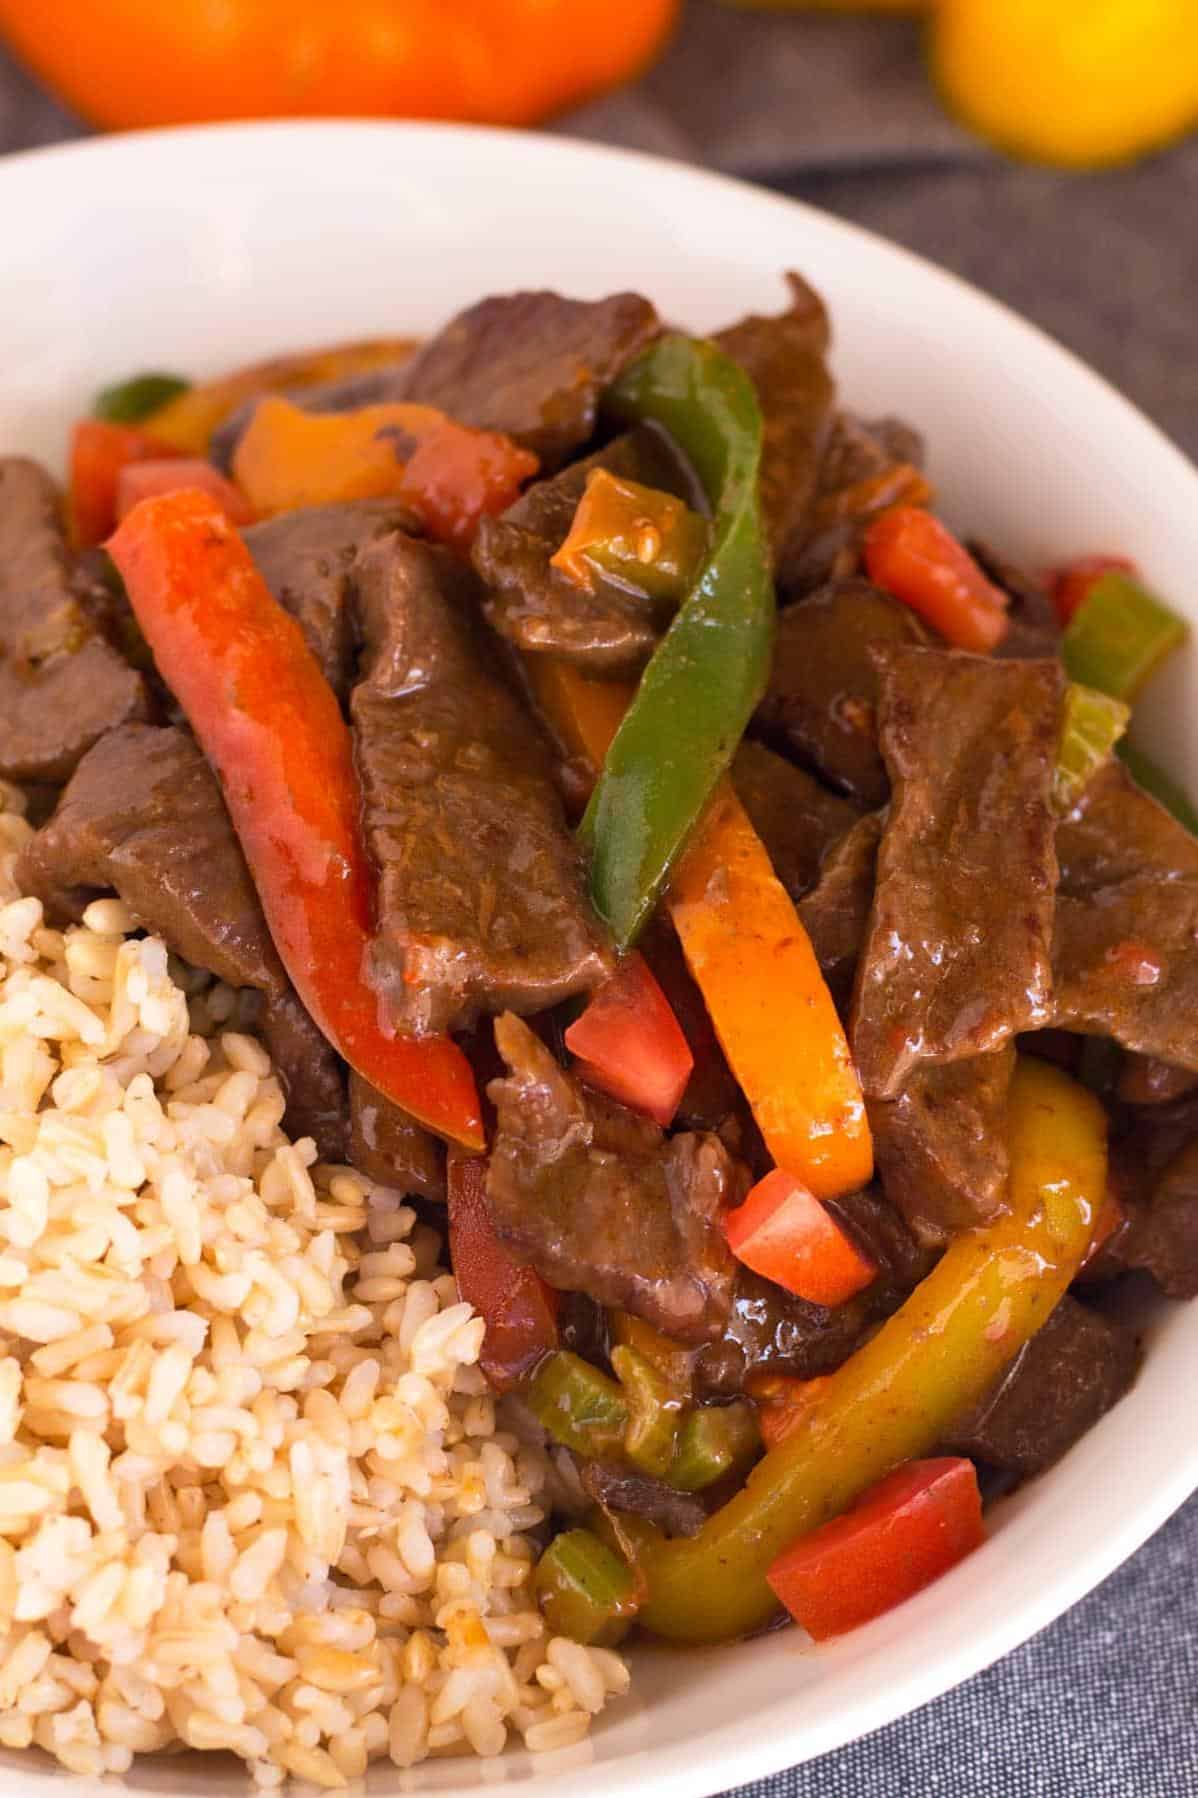  A sizzling skillet of Mexican Pepper Steak with a side of fluffy brown rice